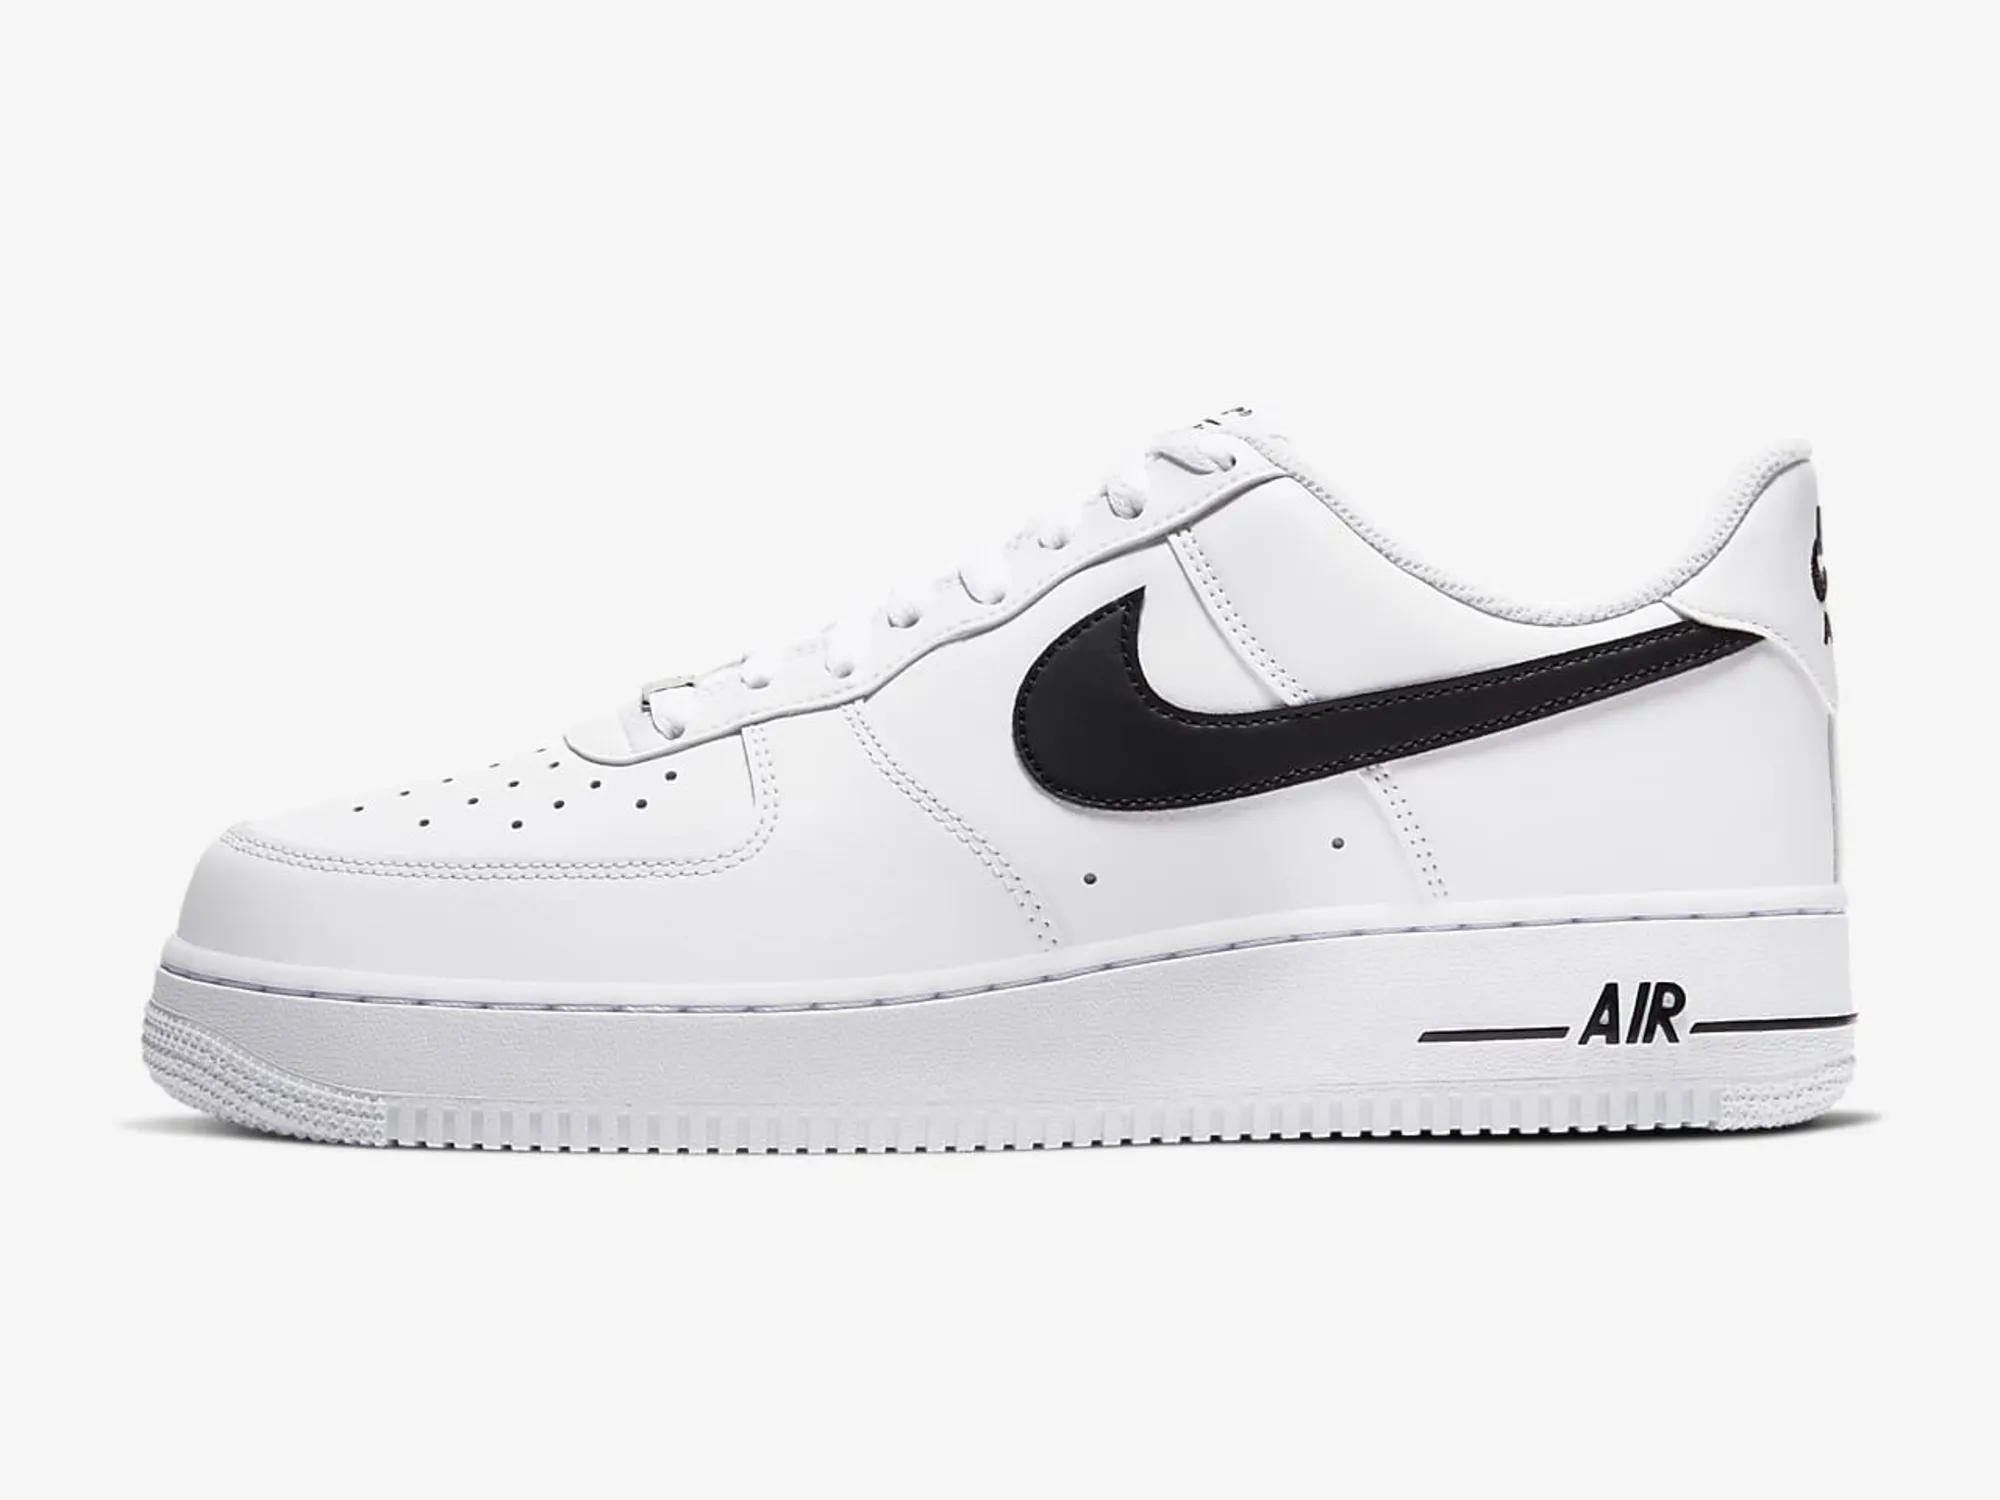 Cop This Week's 20 Trending Nike Air Force 1s | The Sole Supplier